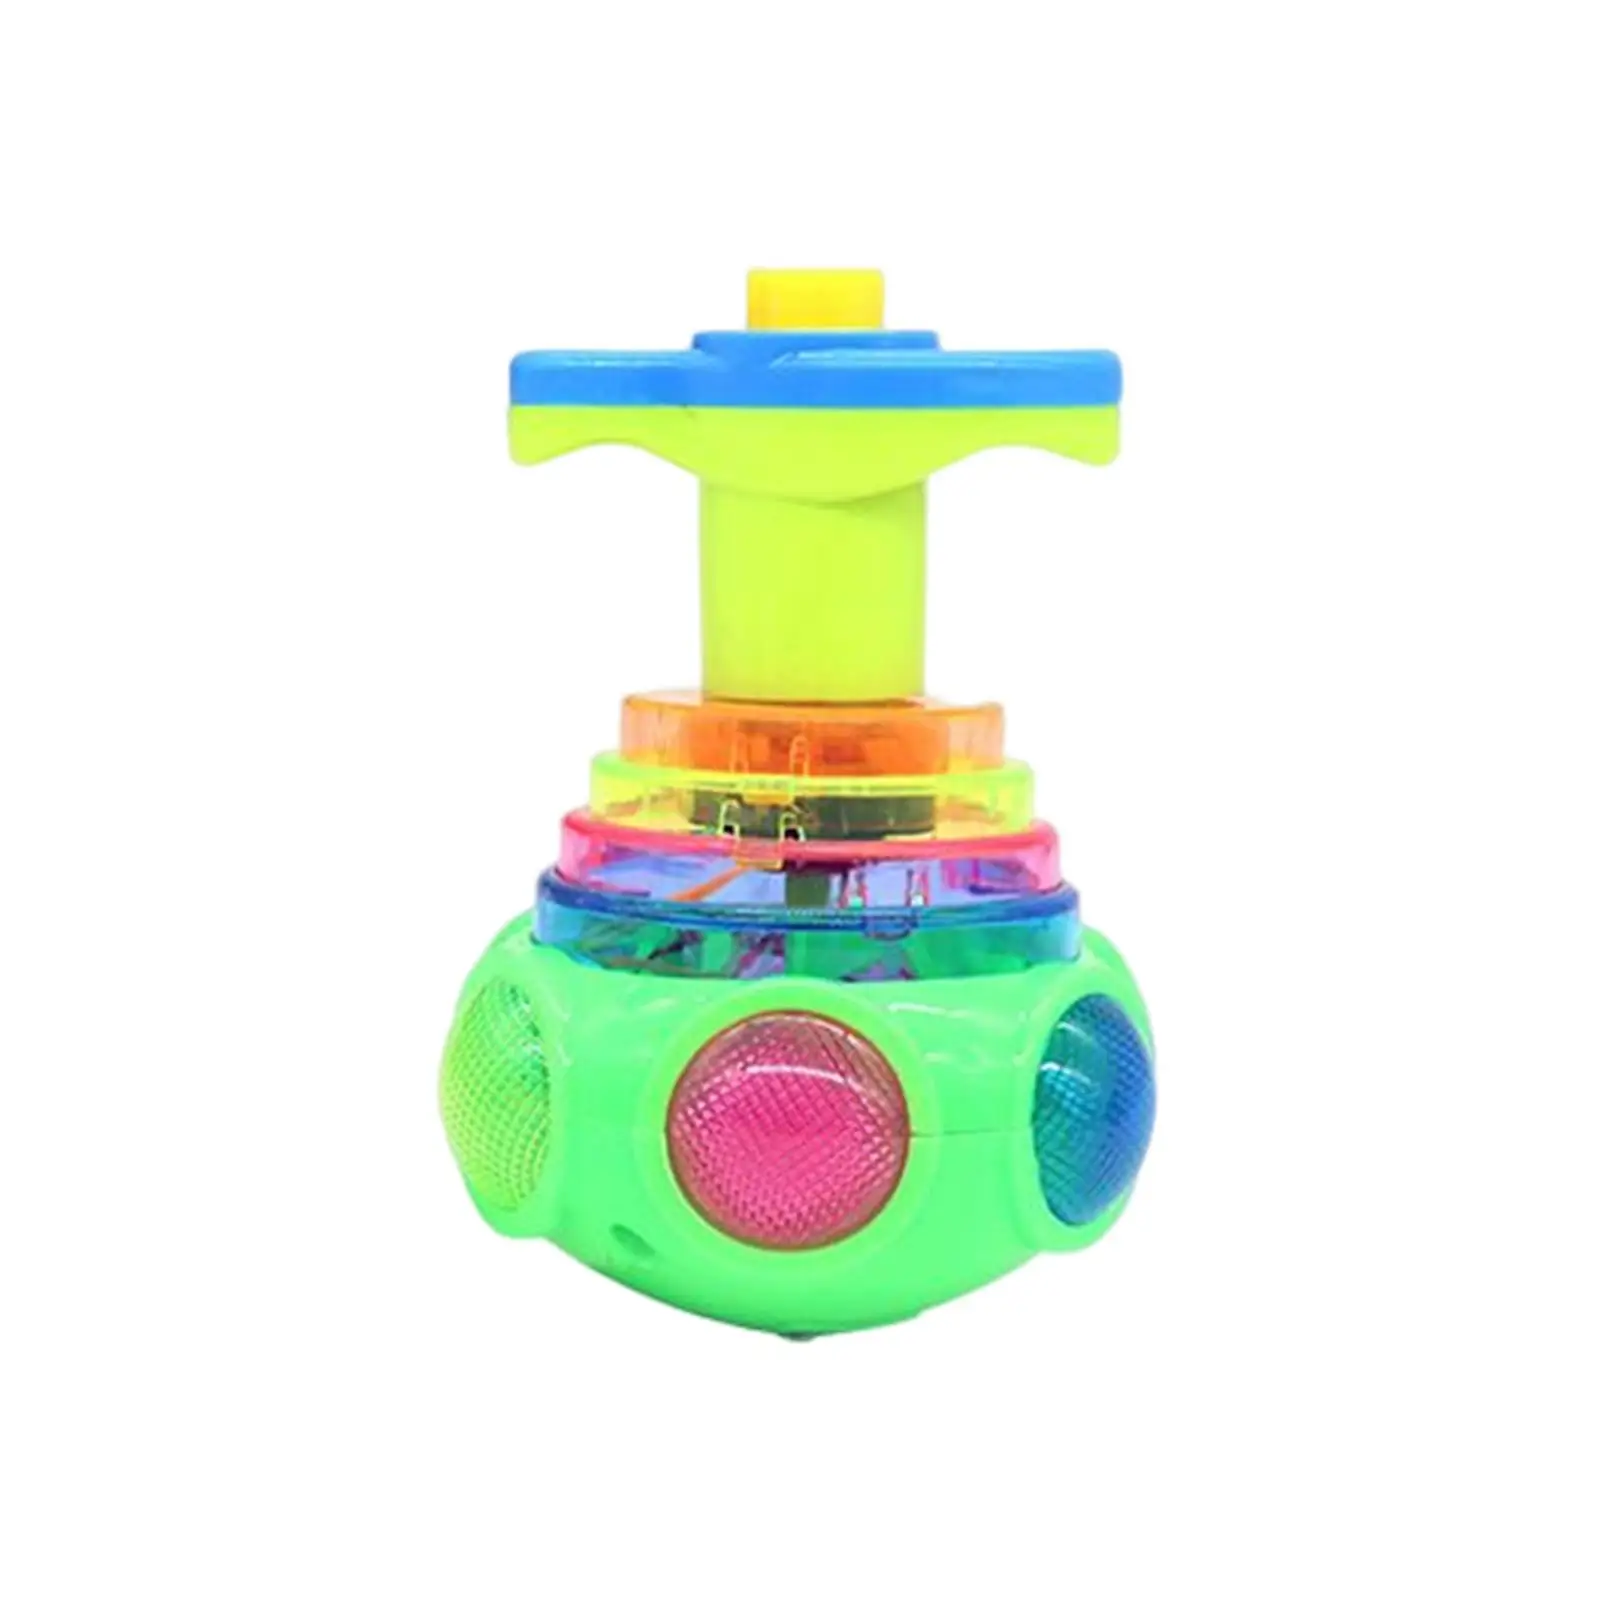 Spin Top Toy Musical Gyroscope LED Gyro spin Novelty Flashing spin Music Gyroscope